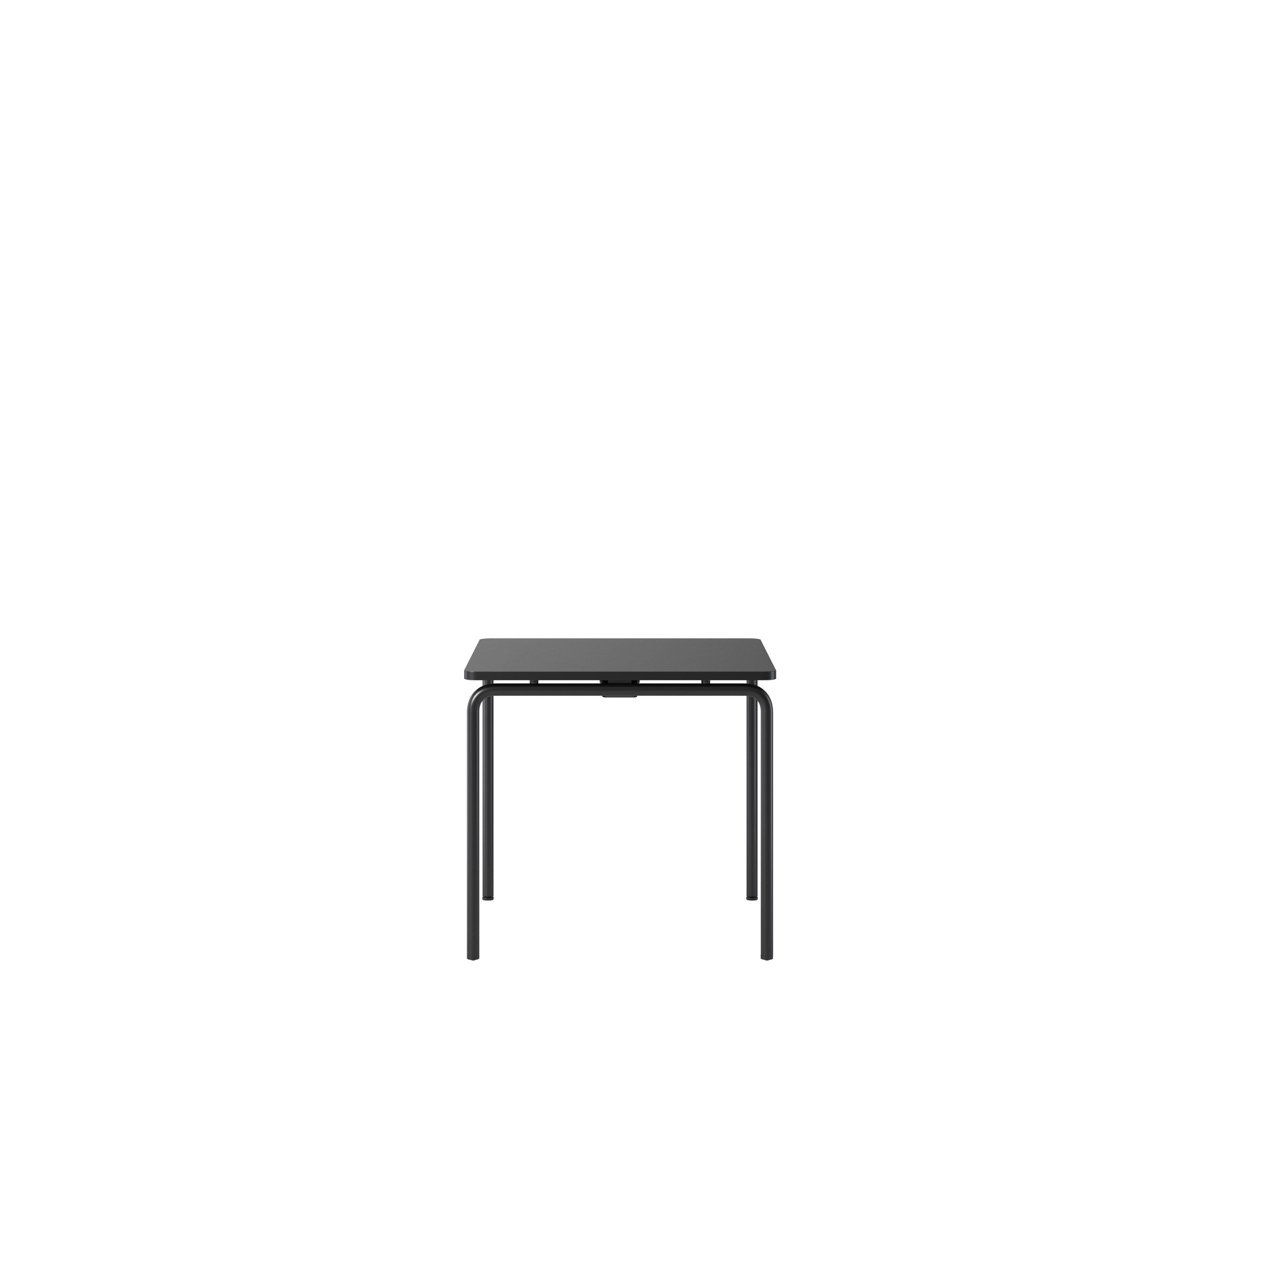 OCEE&FOUR - Tables - FourReal 74 - 80 x 80 - Straight - Packshot Image 1 Large